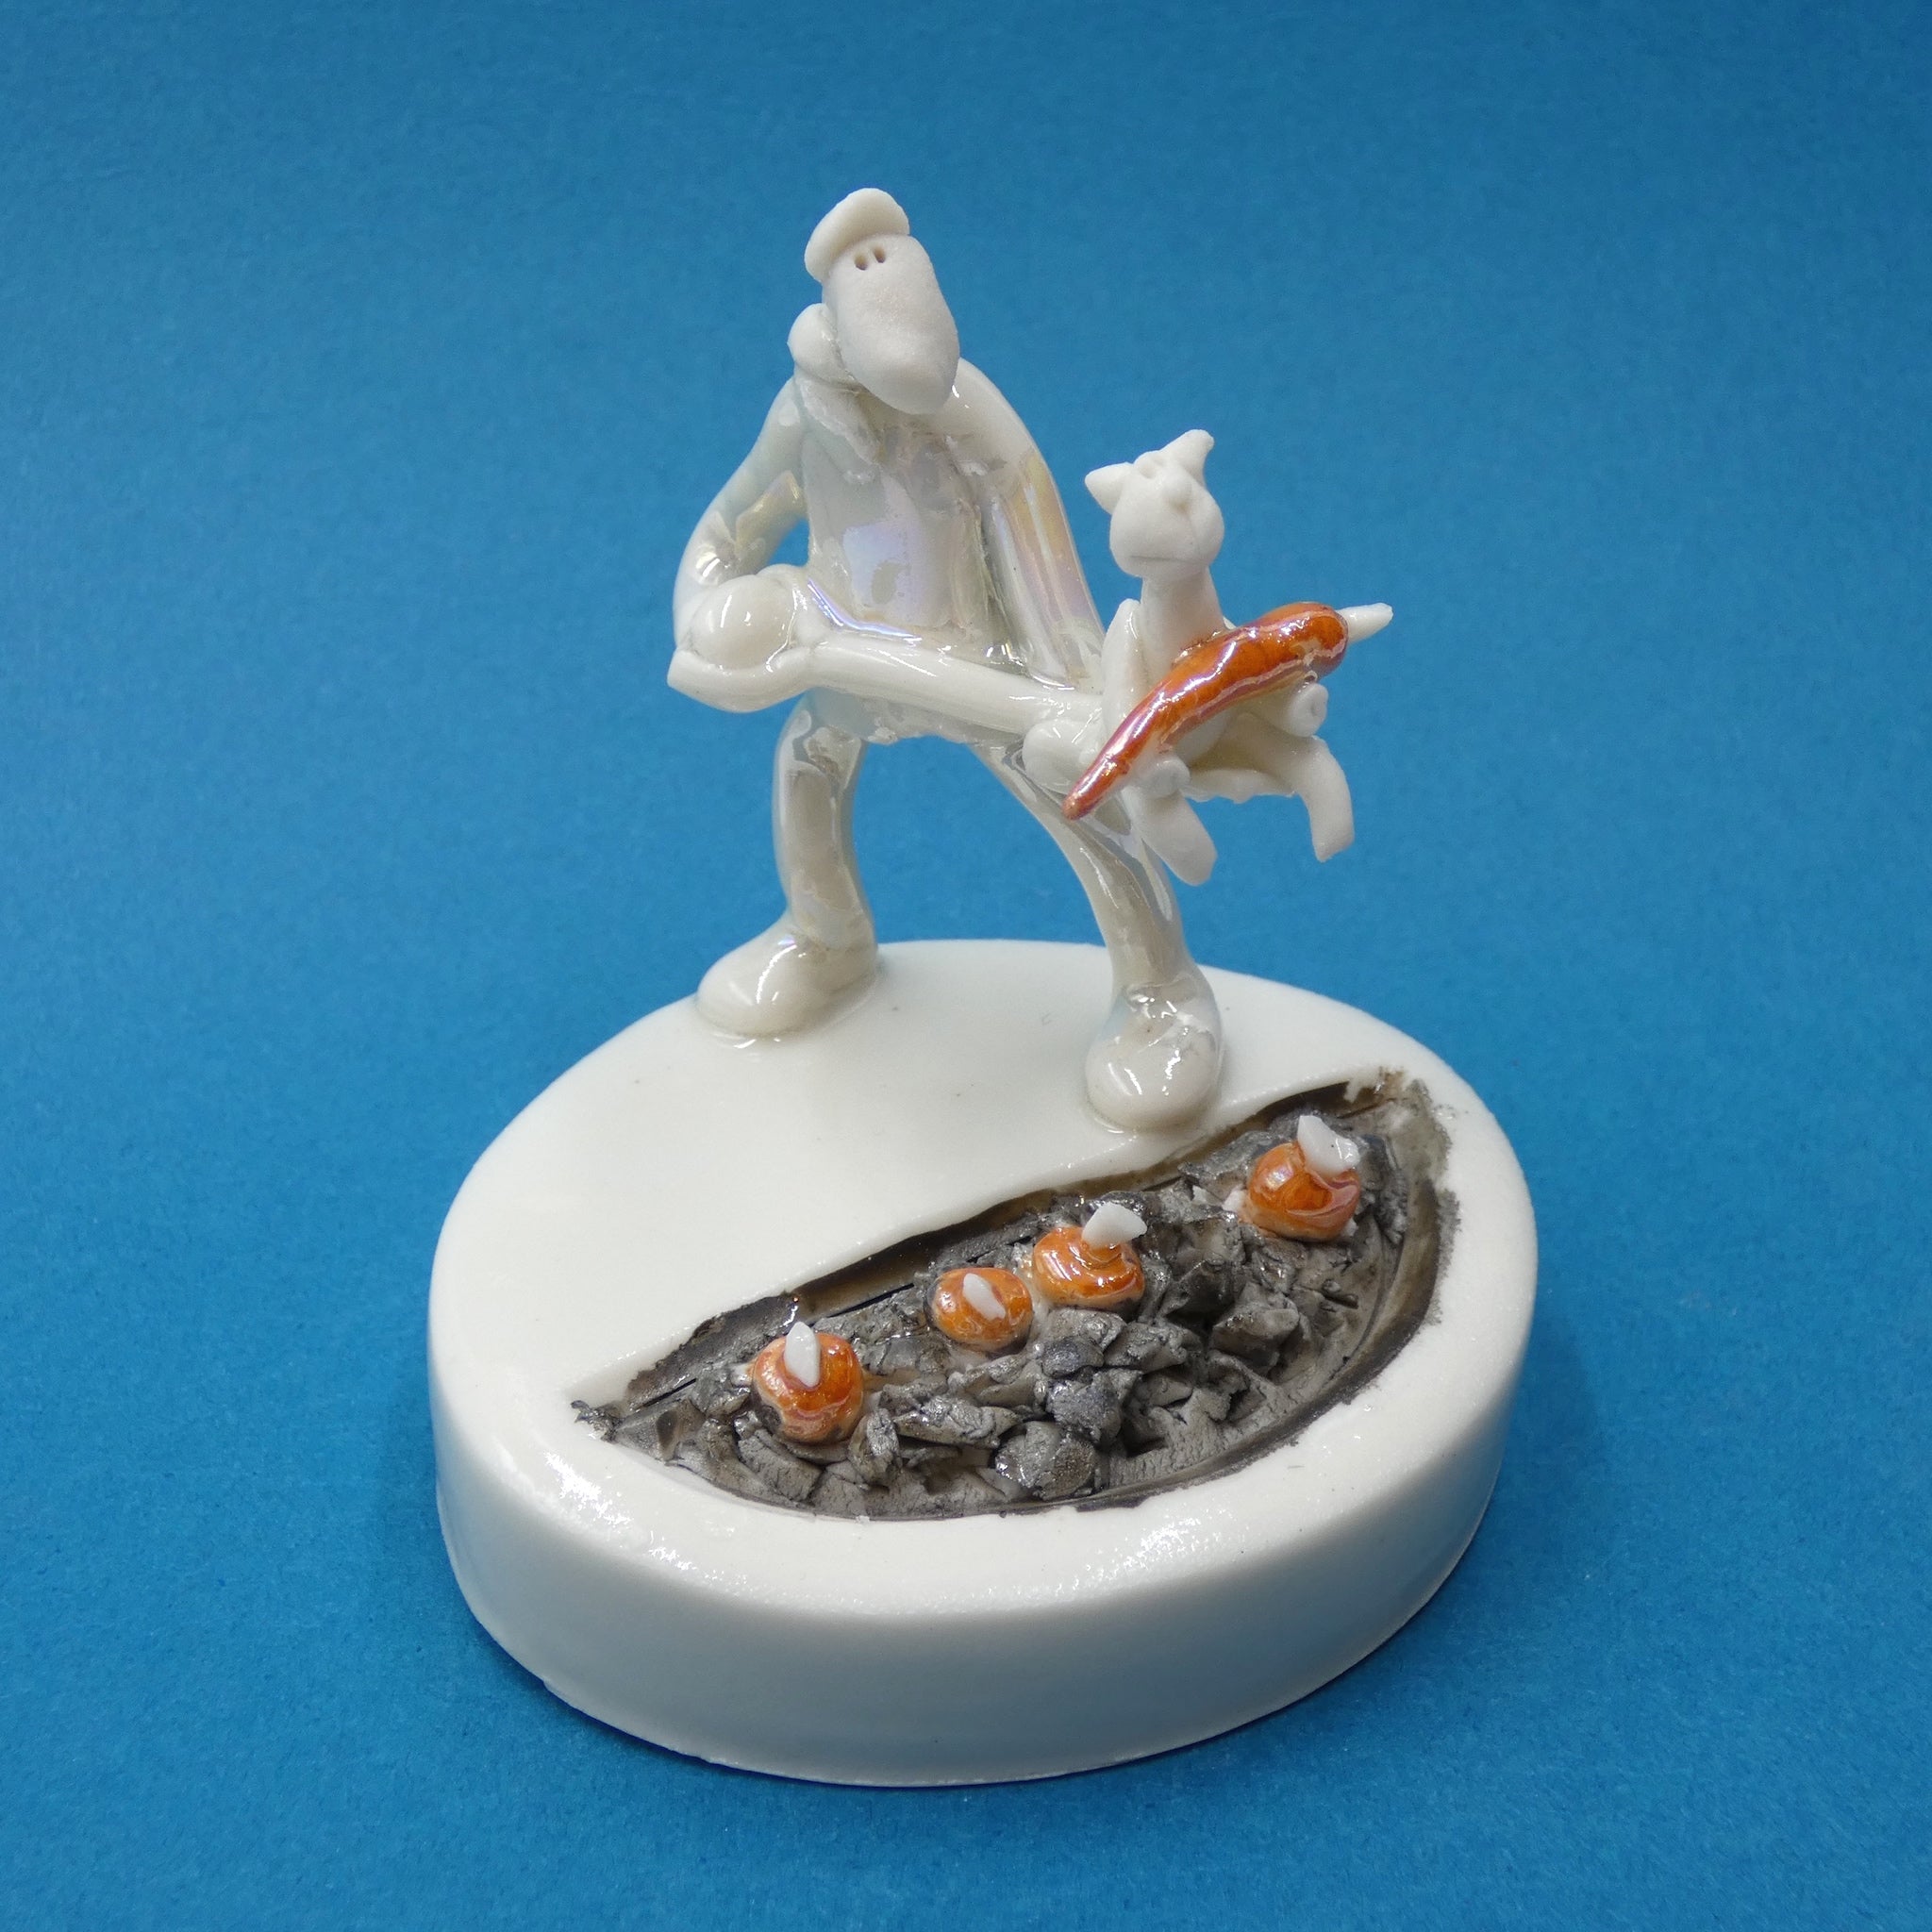 Porcelain sculpture of a man tending the carrots with help from his cat by artist Andrew Bull